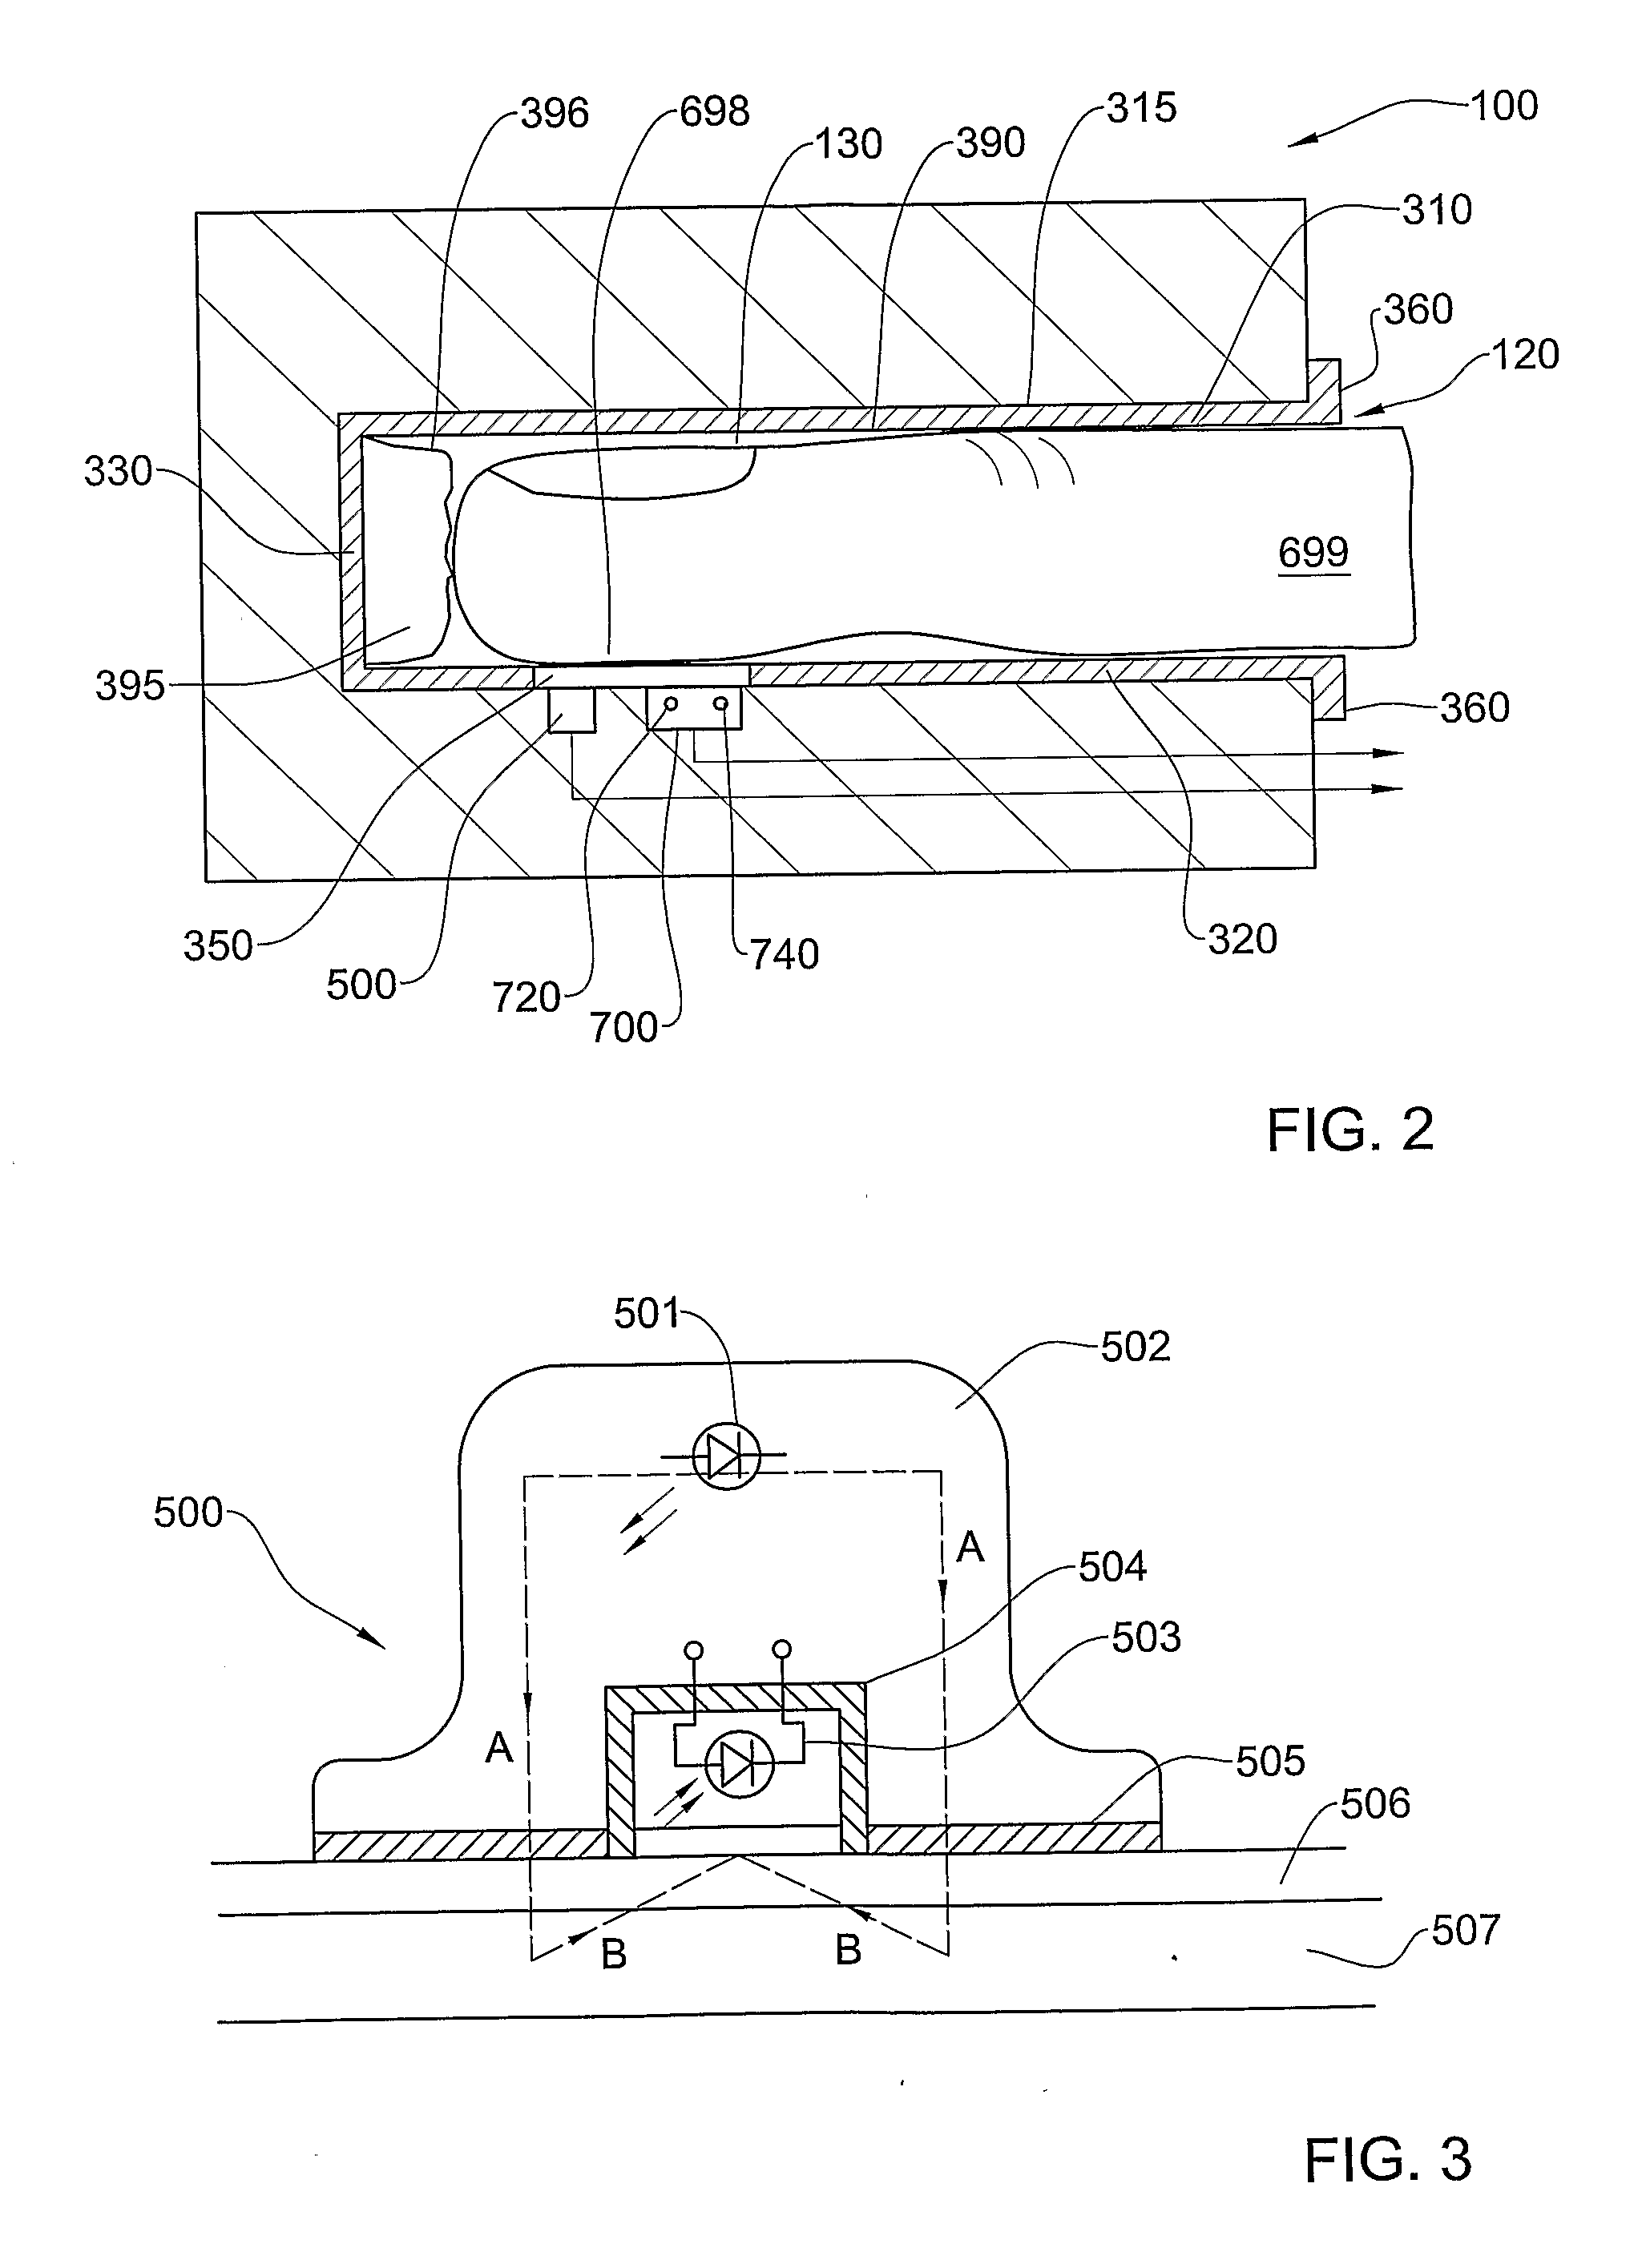 Apparatus, System and Method for Determining Cardio-Respiratory State